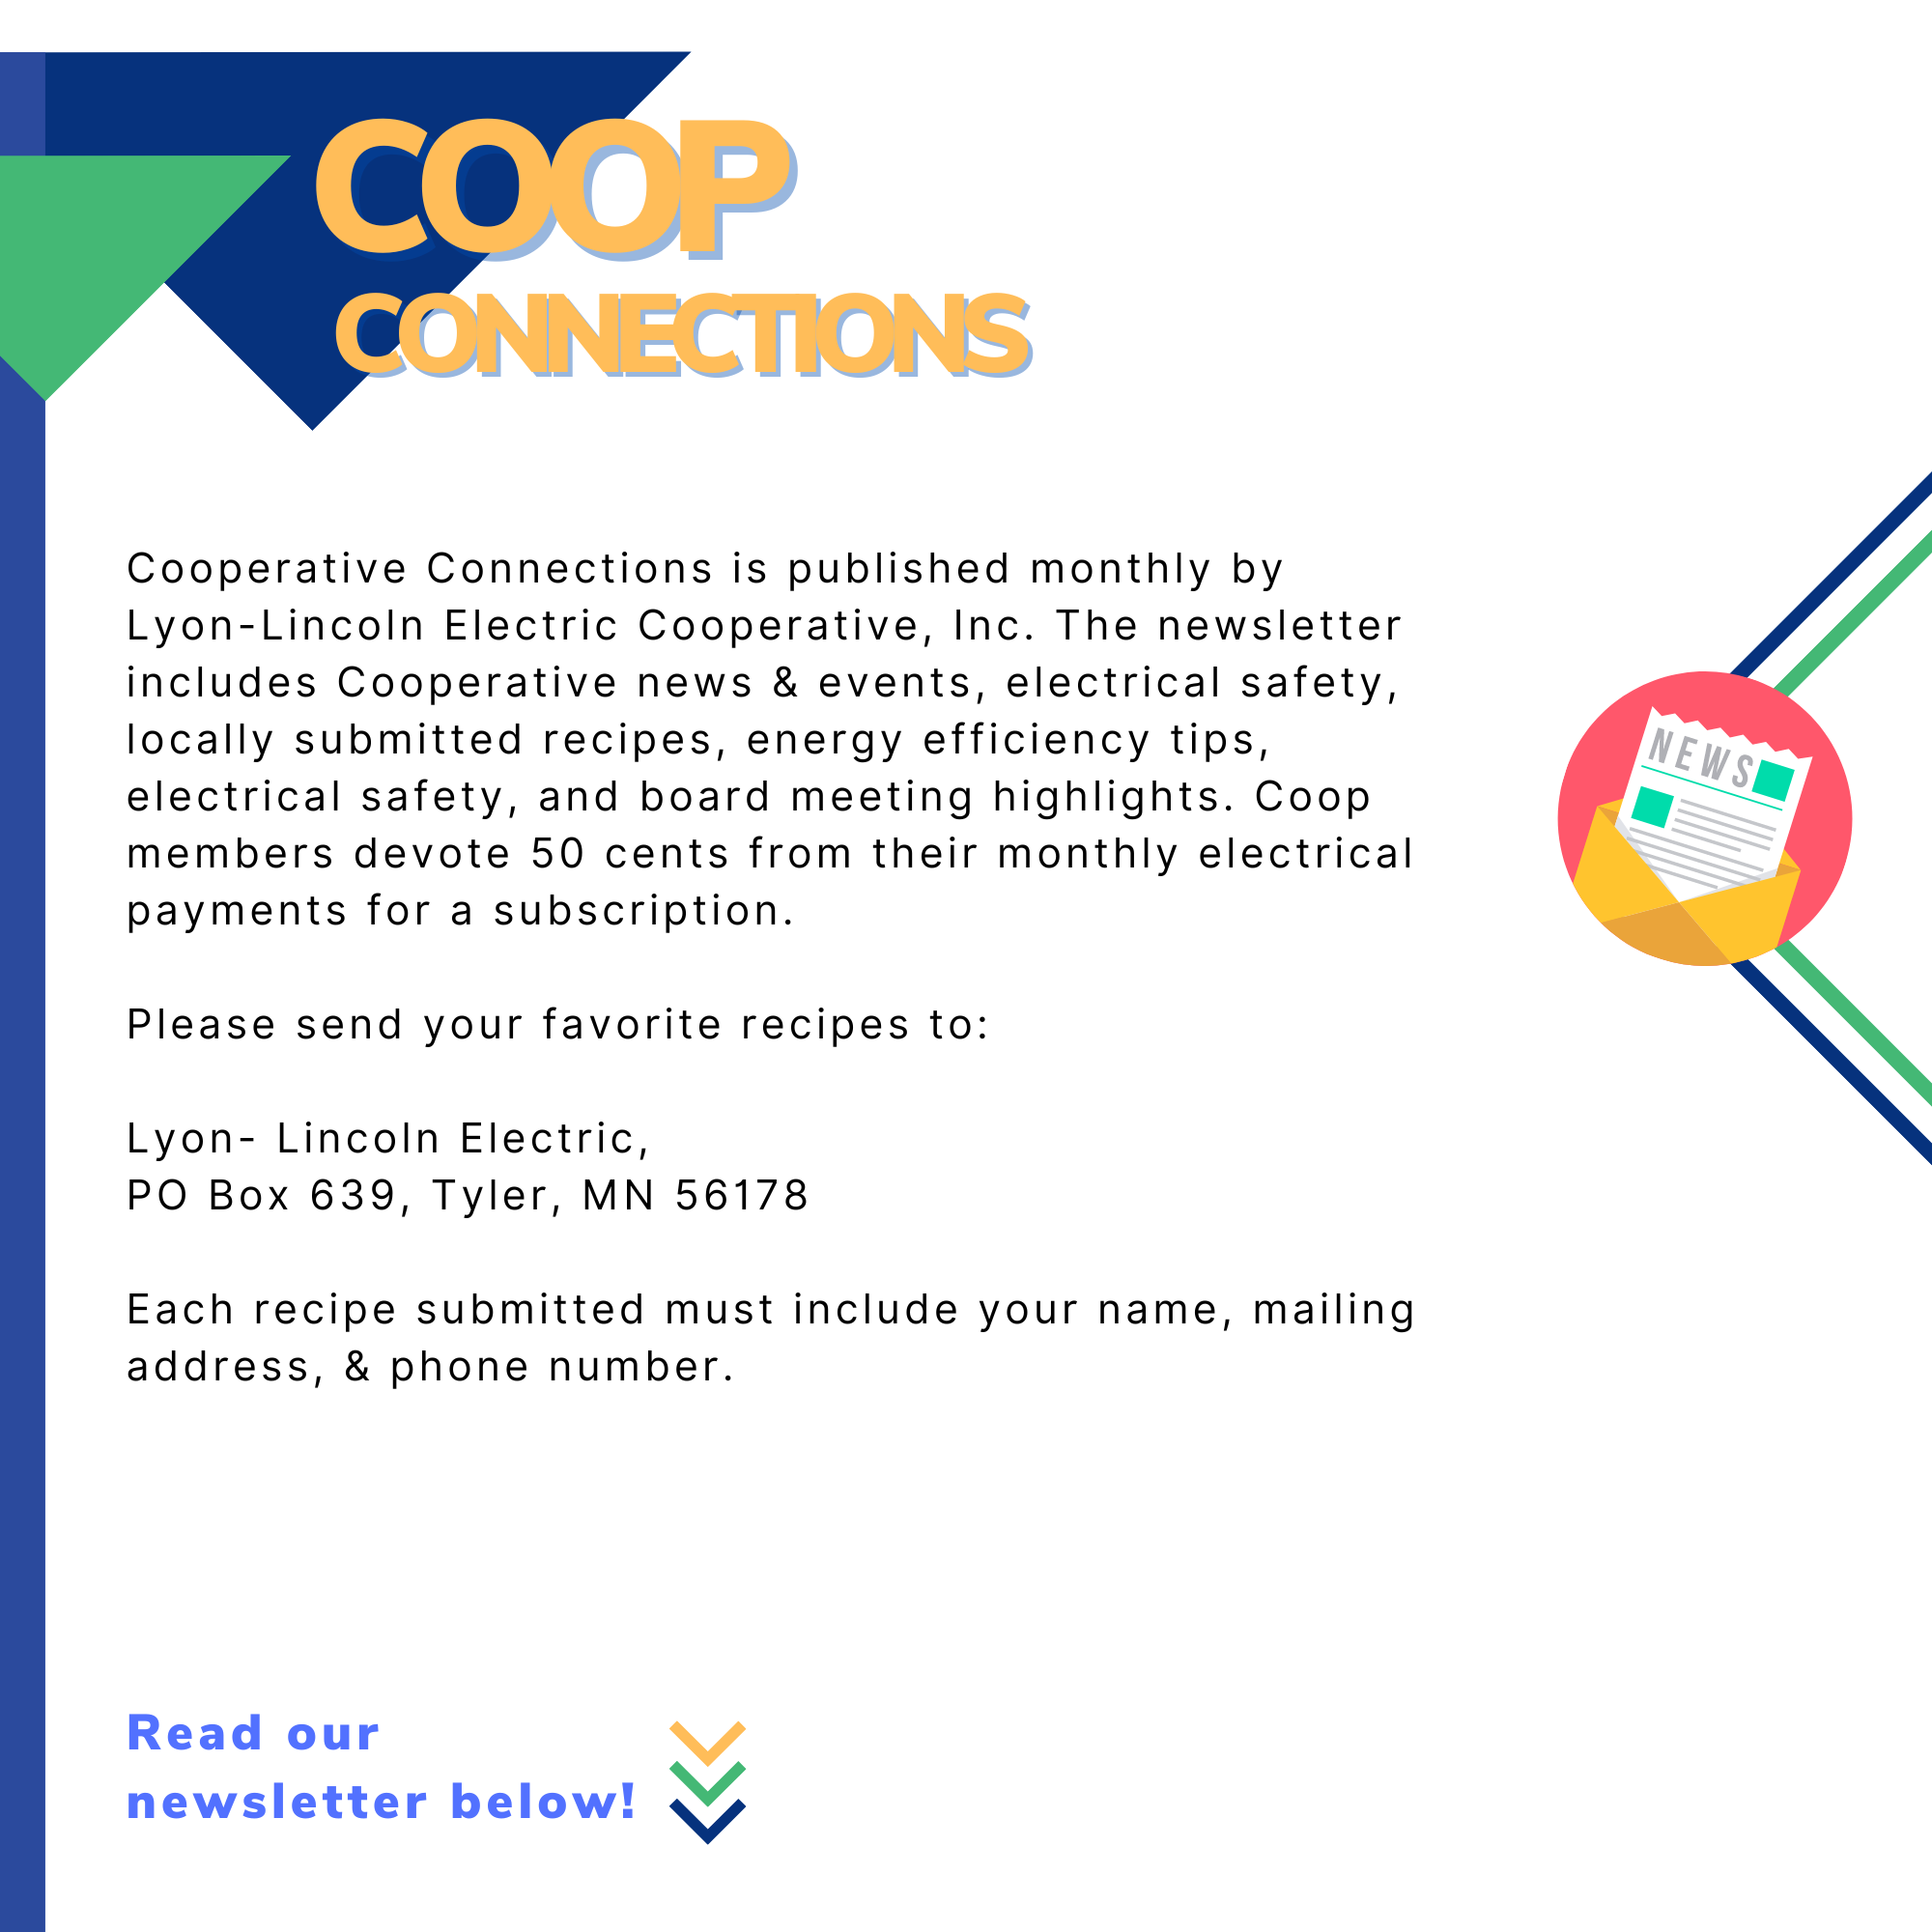 Coop Connections